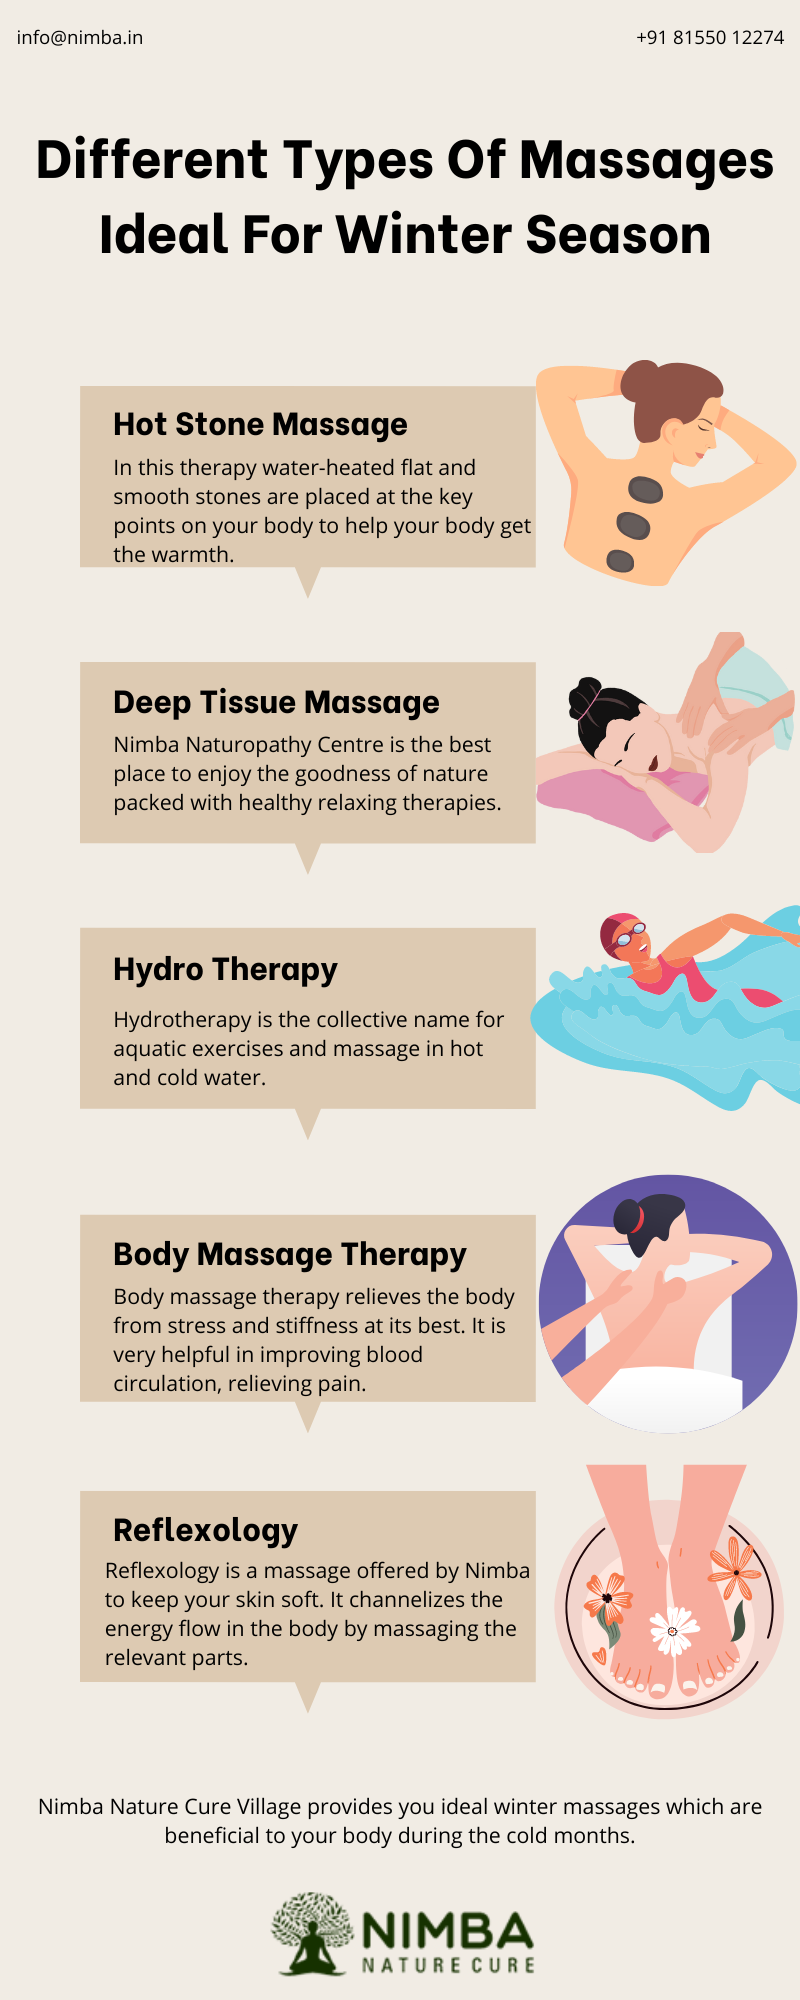 Different Types Of Massages Ideal For Winter Season